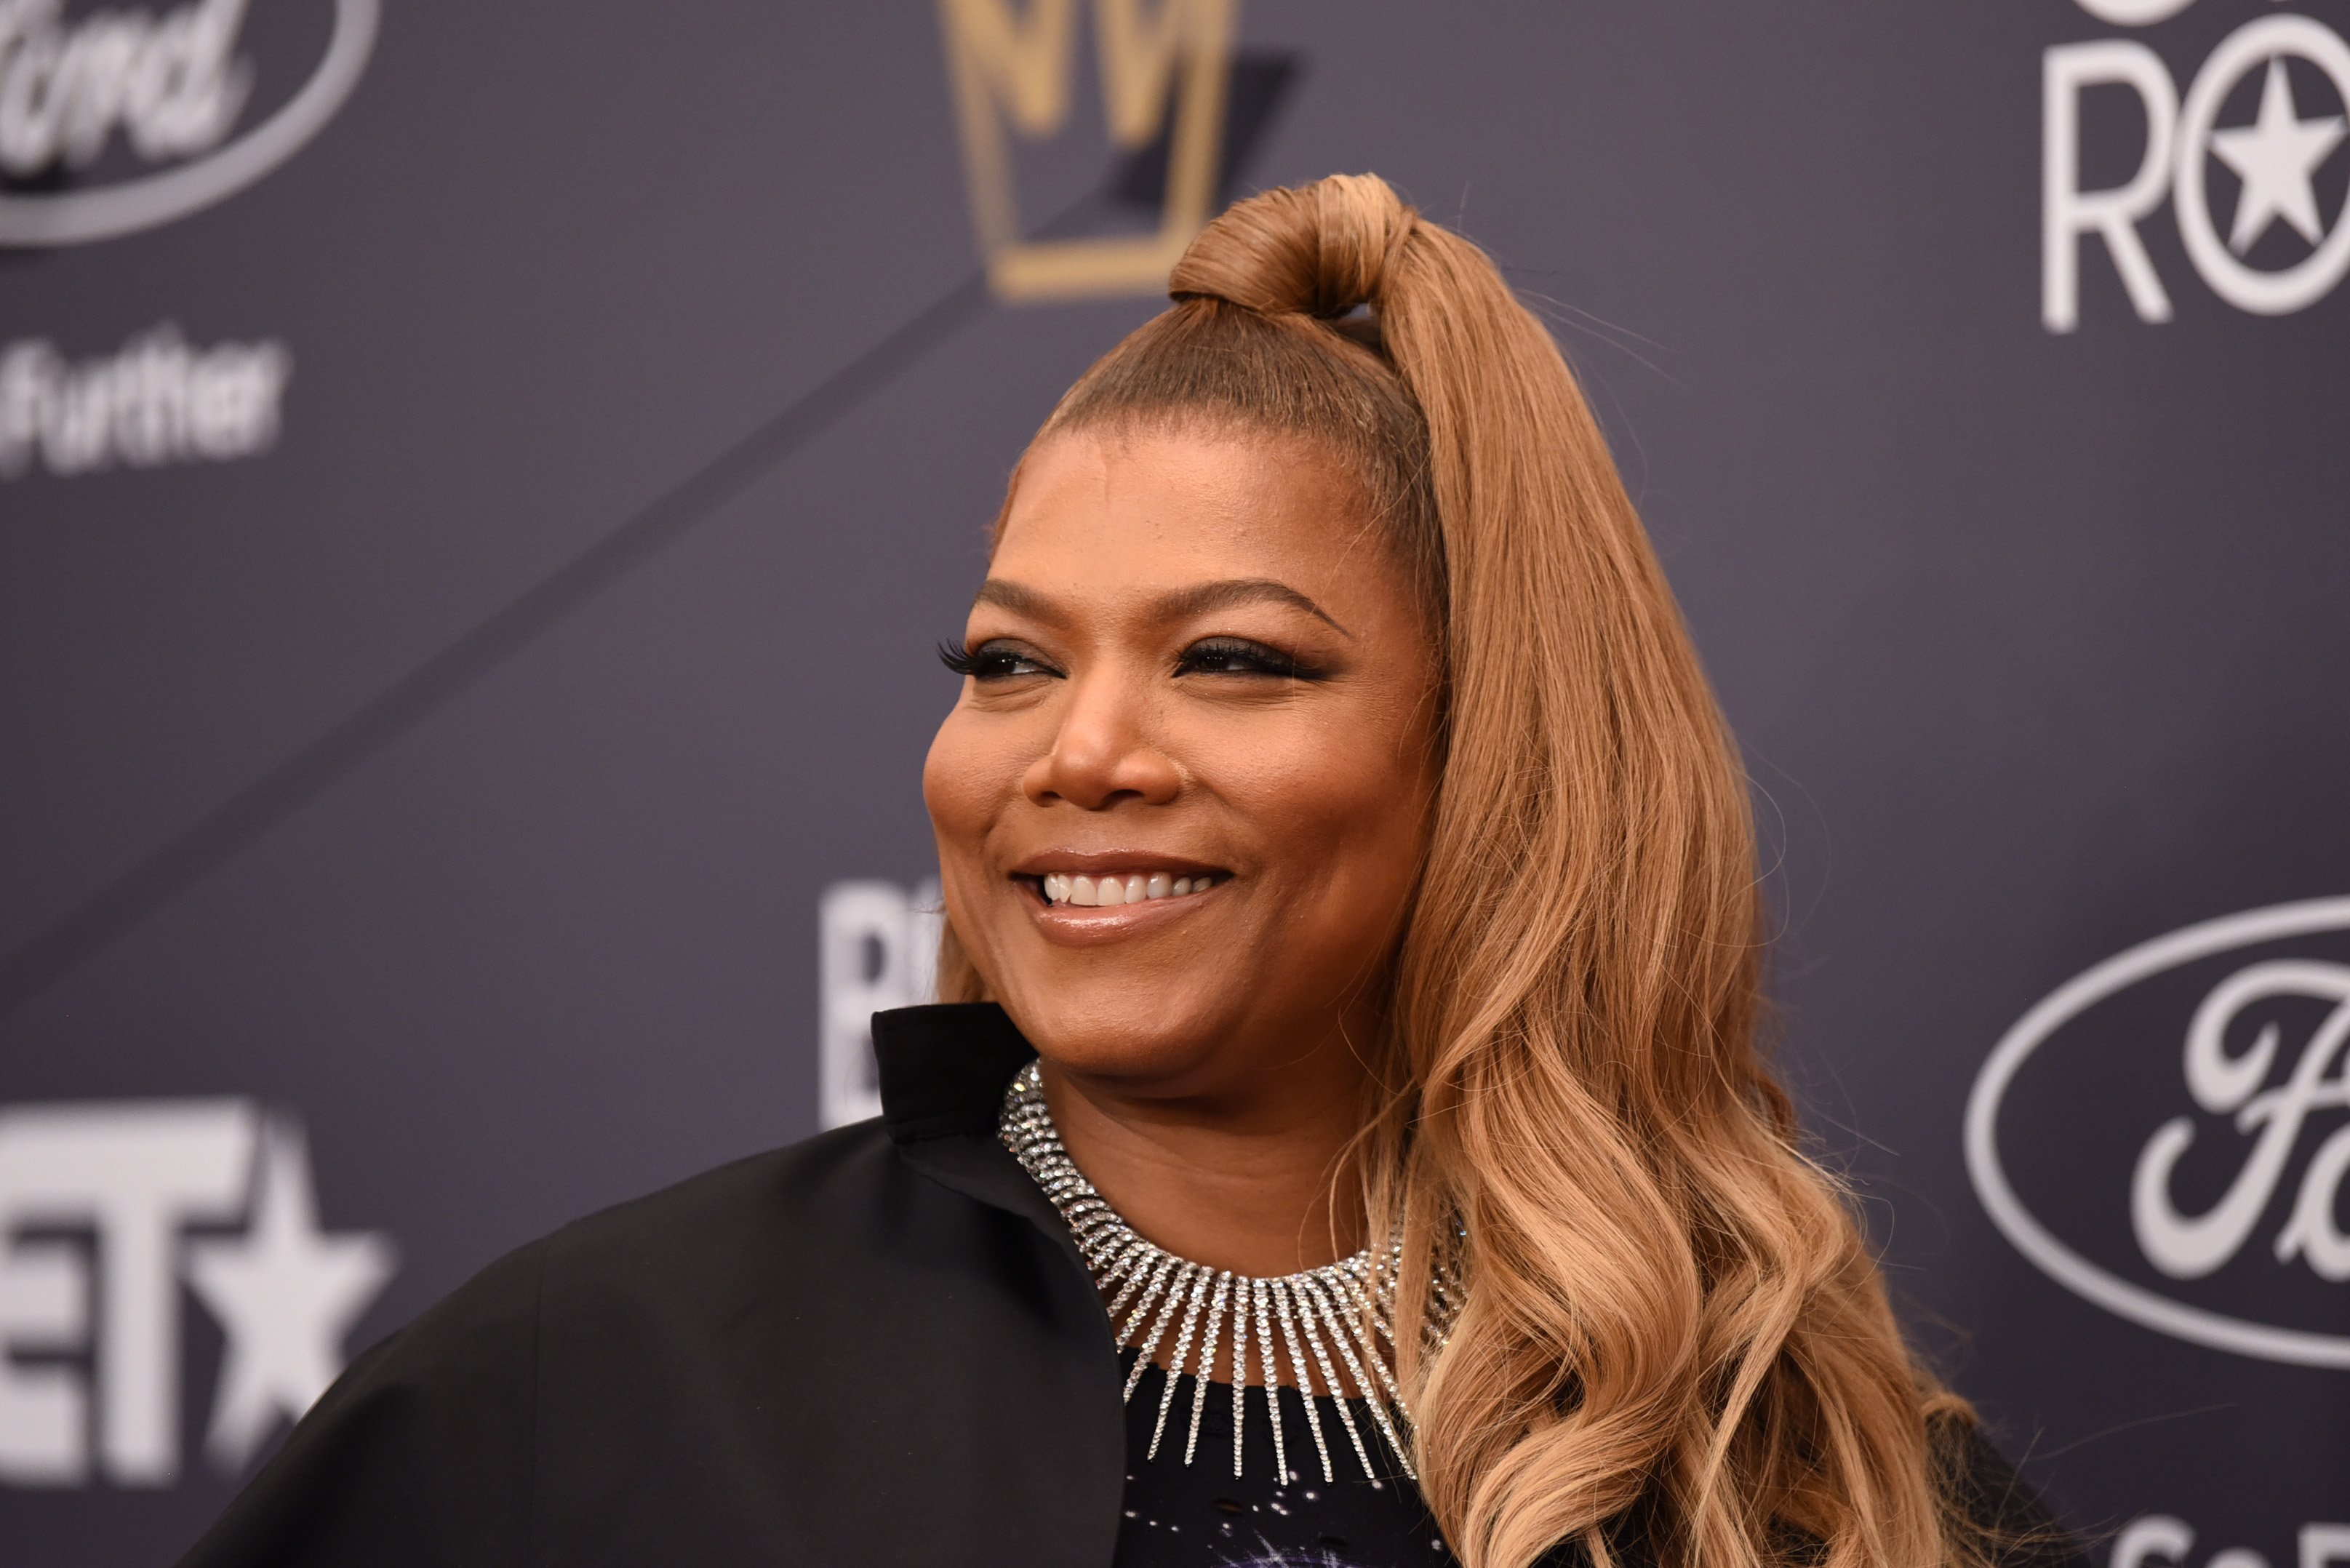 Queen Latifah posing at the red carpet of Black Girls Rock! in August 2018 in New Jersey. | Photo: Getty Images